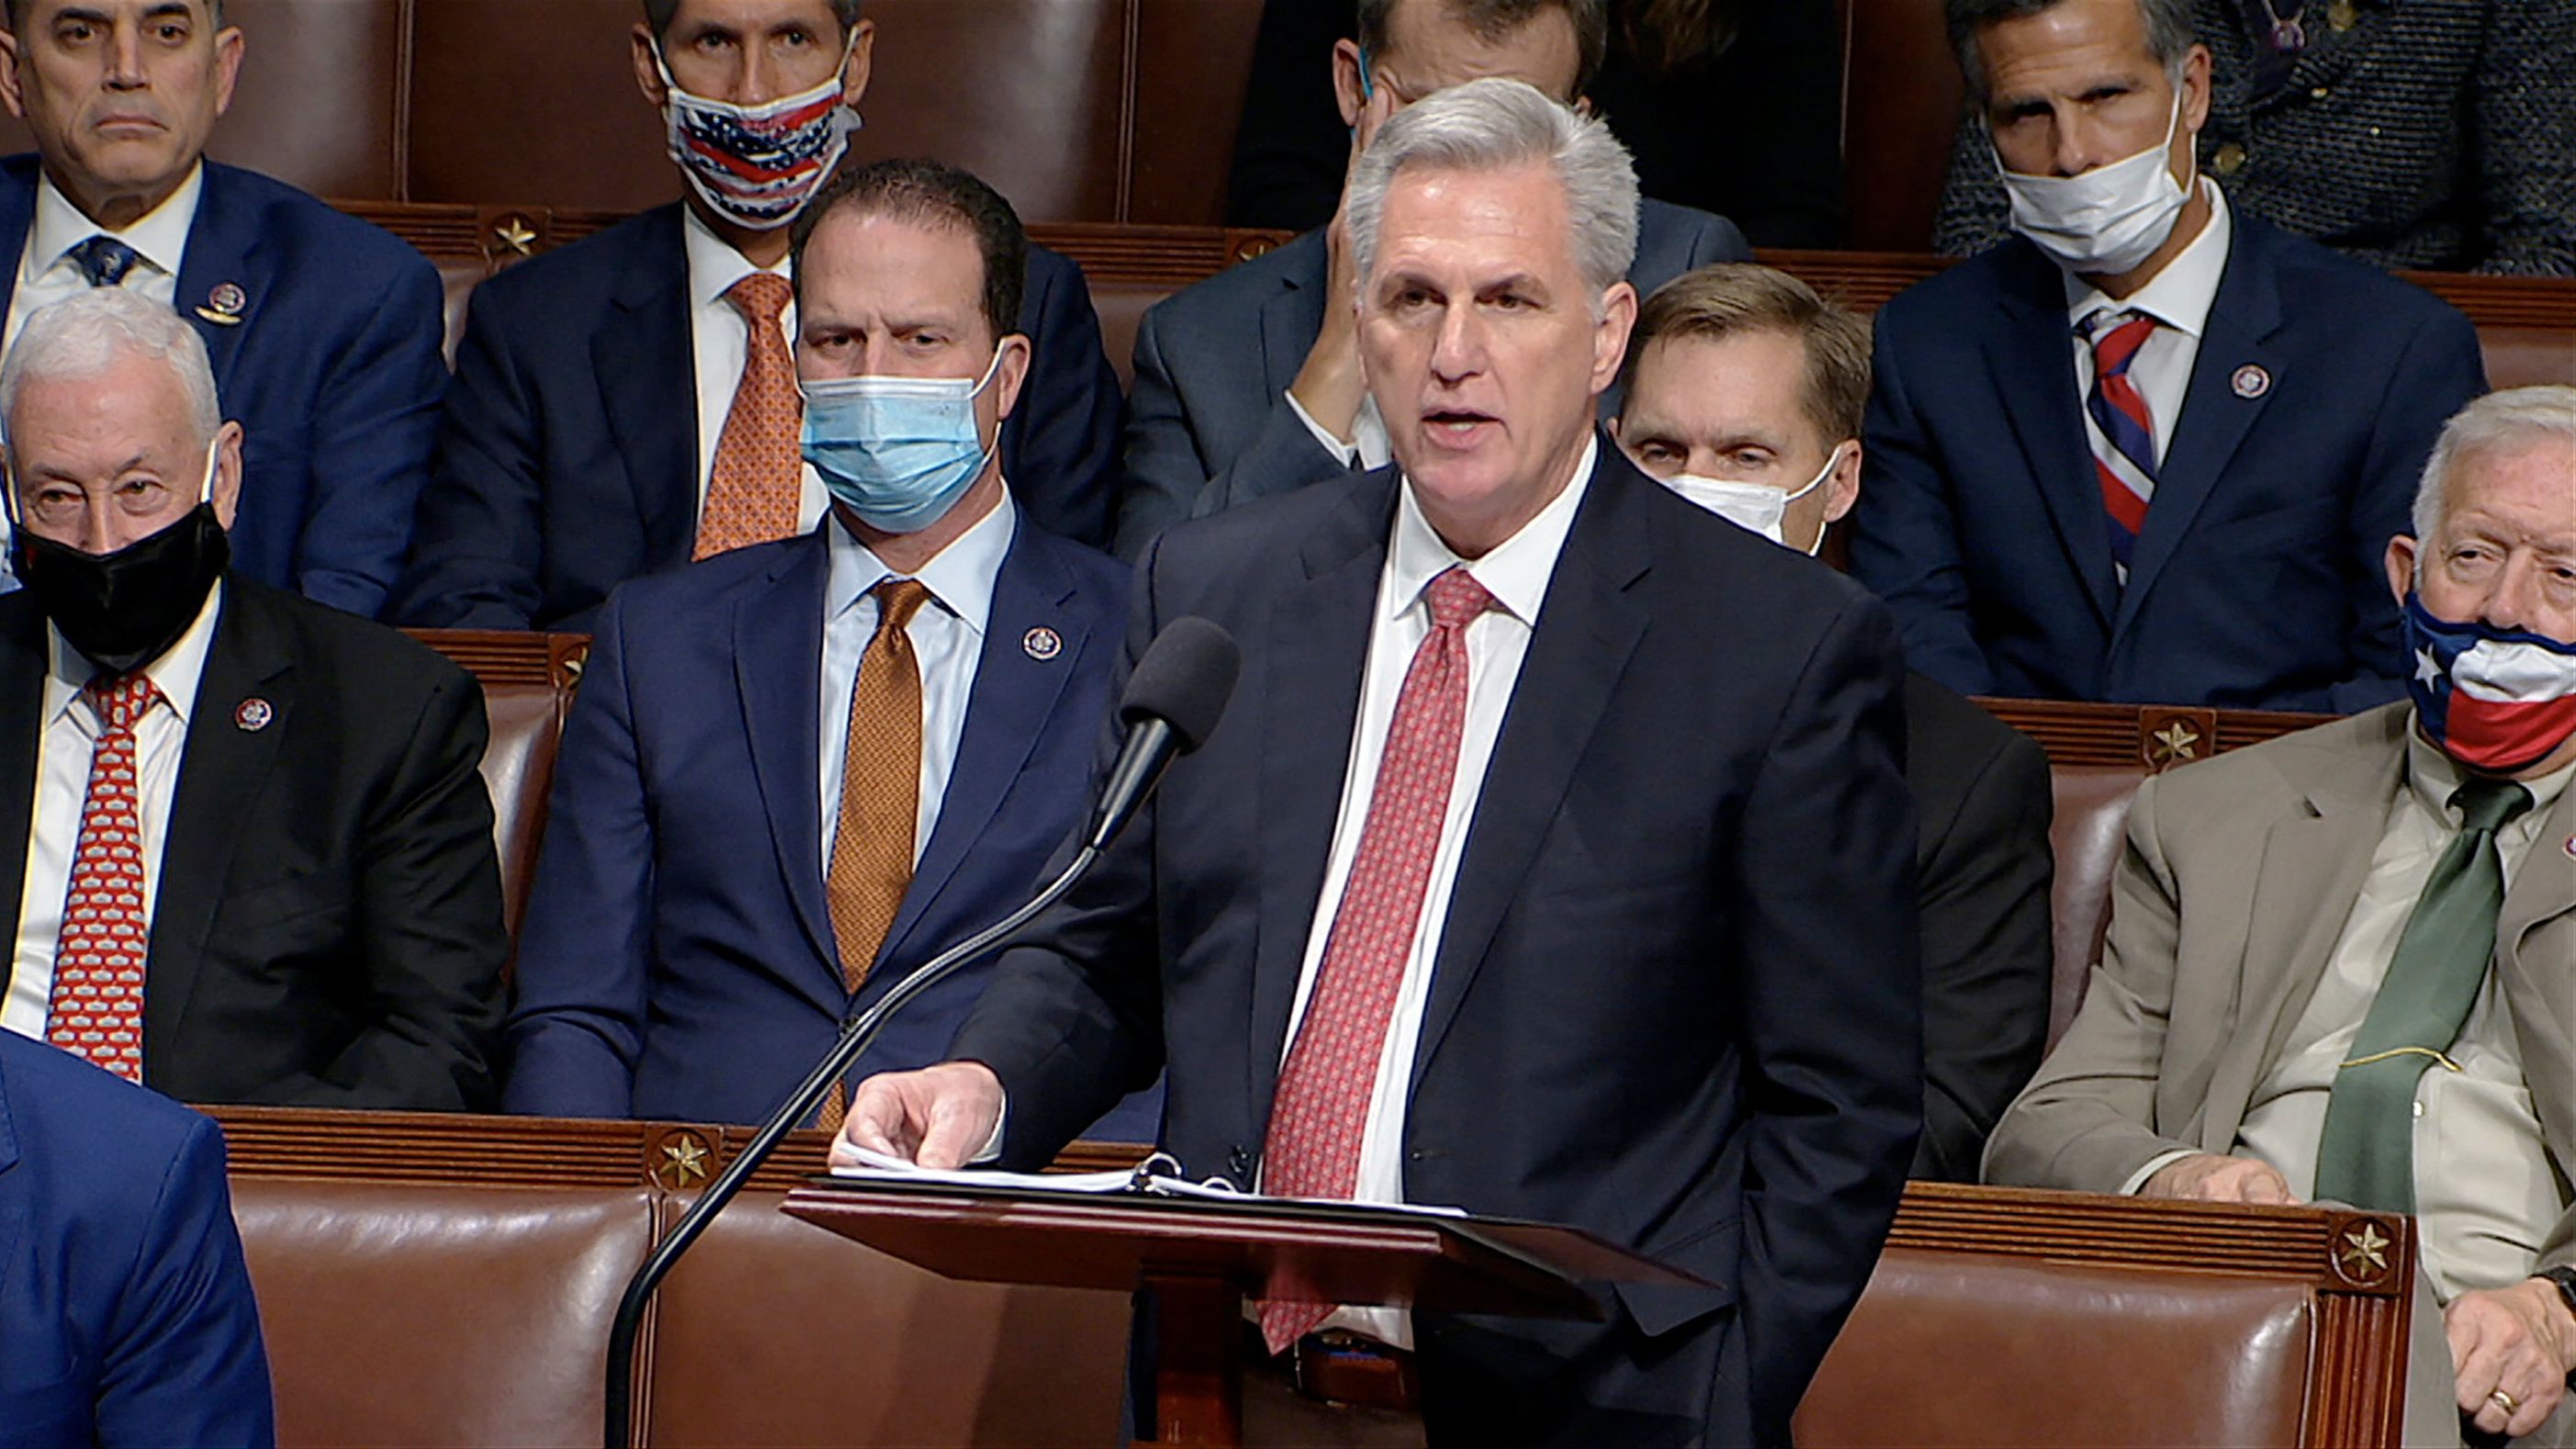 House Minority Leader Kevin McCarthy speaks on the House floor during debate on the Democrats' expansive social and environment bill at the US Capitol on November 18, 2021.